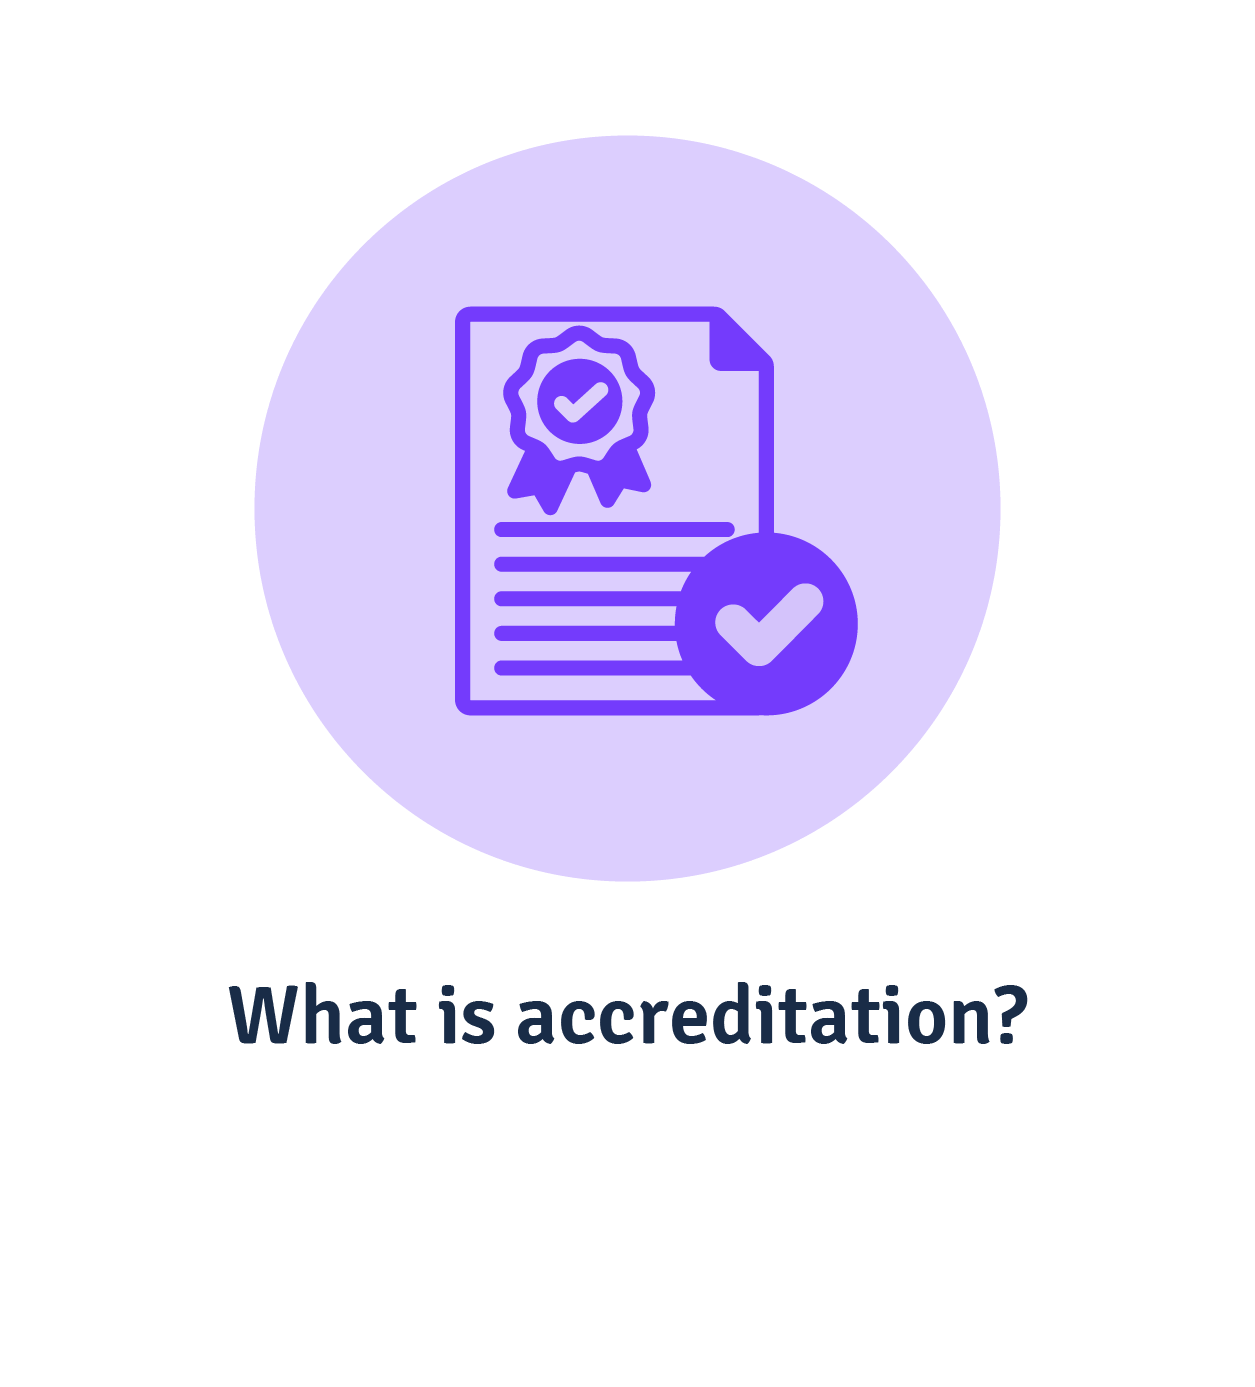 What is accreditation?